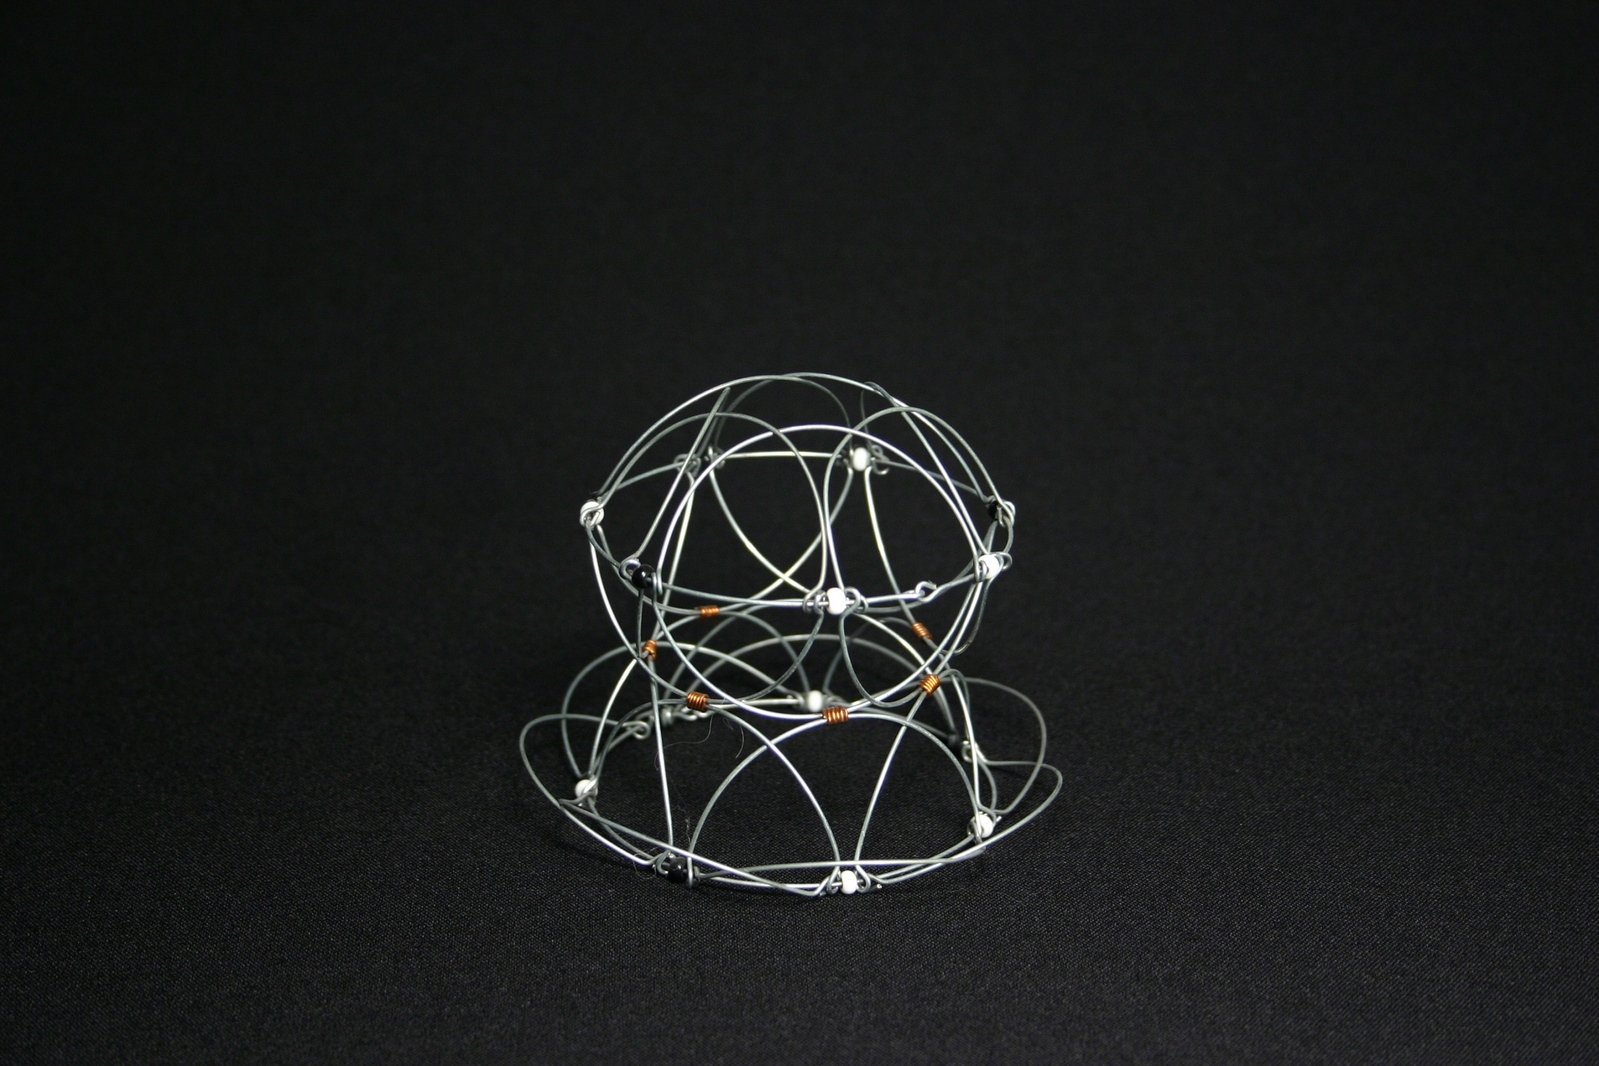 a couple of pieces of wire are shown on a black background